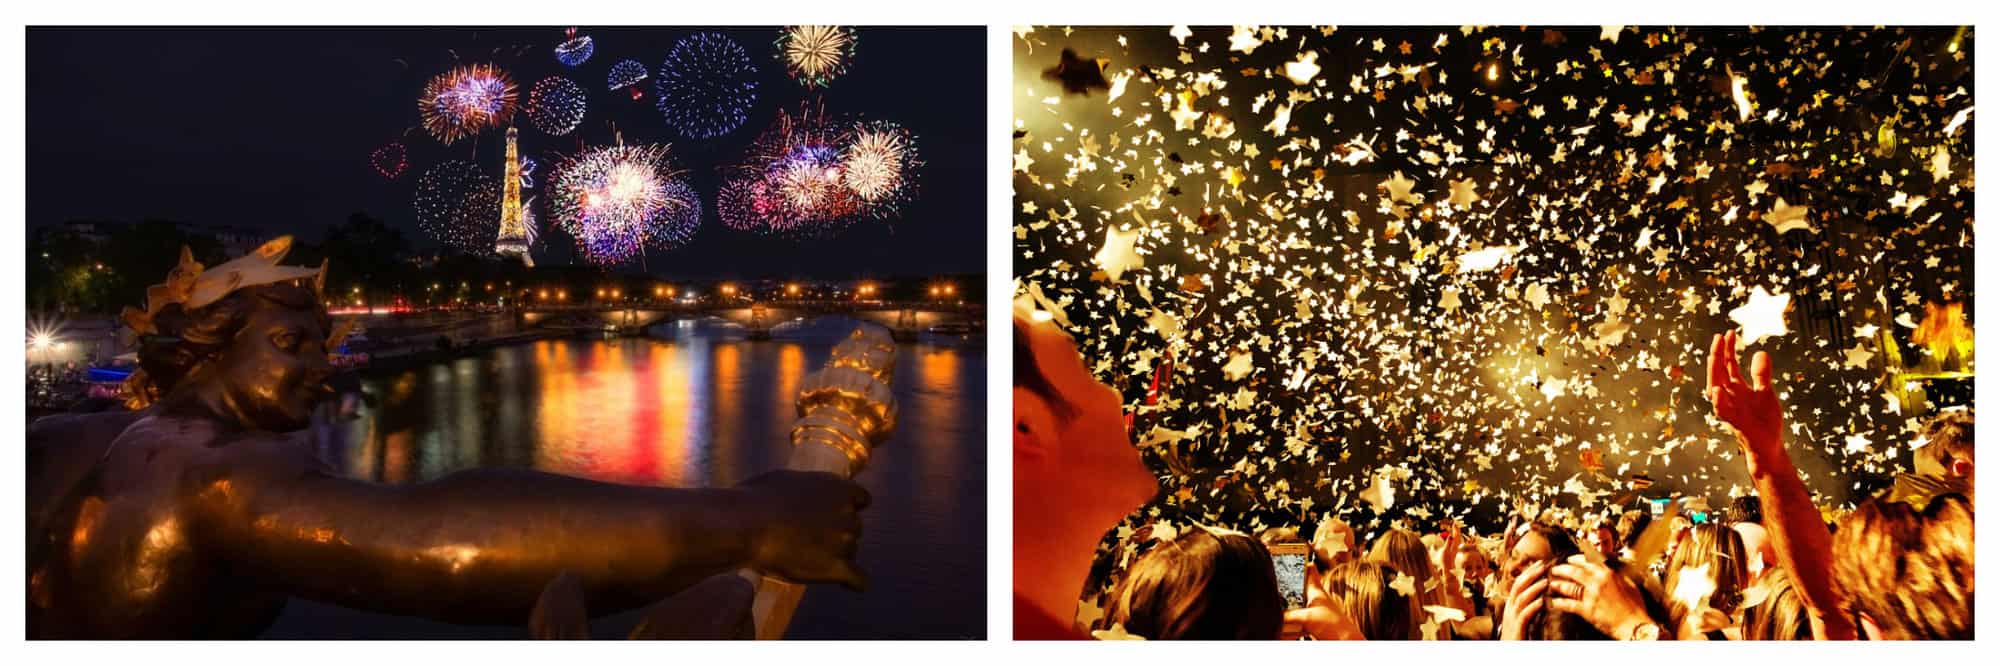 Left: The Eiffel Tower and the Paris sky is lit with fireworks, seen behind a golden statue. Right: A shower of golden confetti down a crowd of New Year's Eve celebrants.